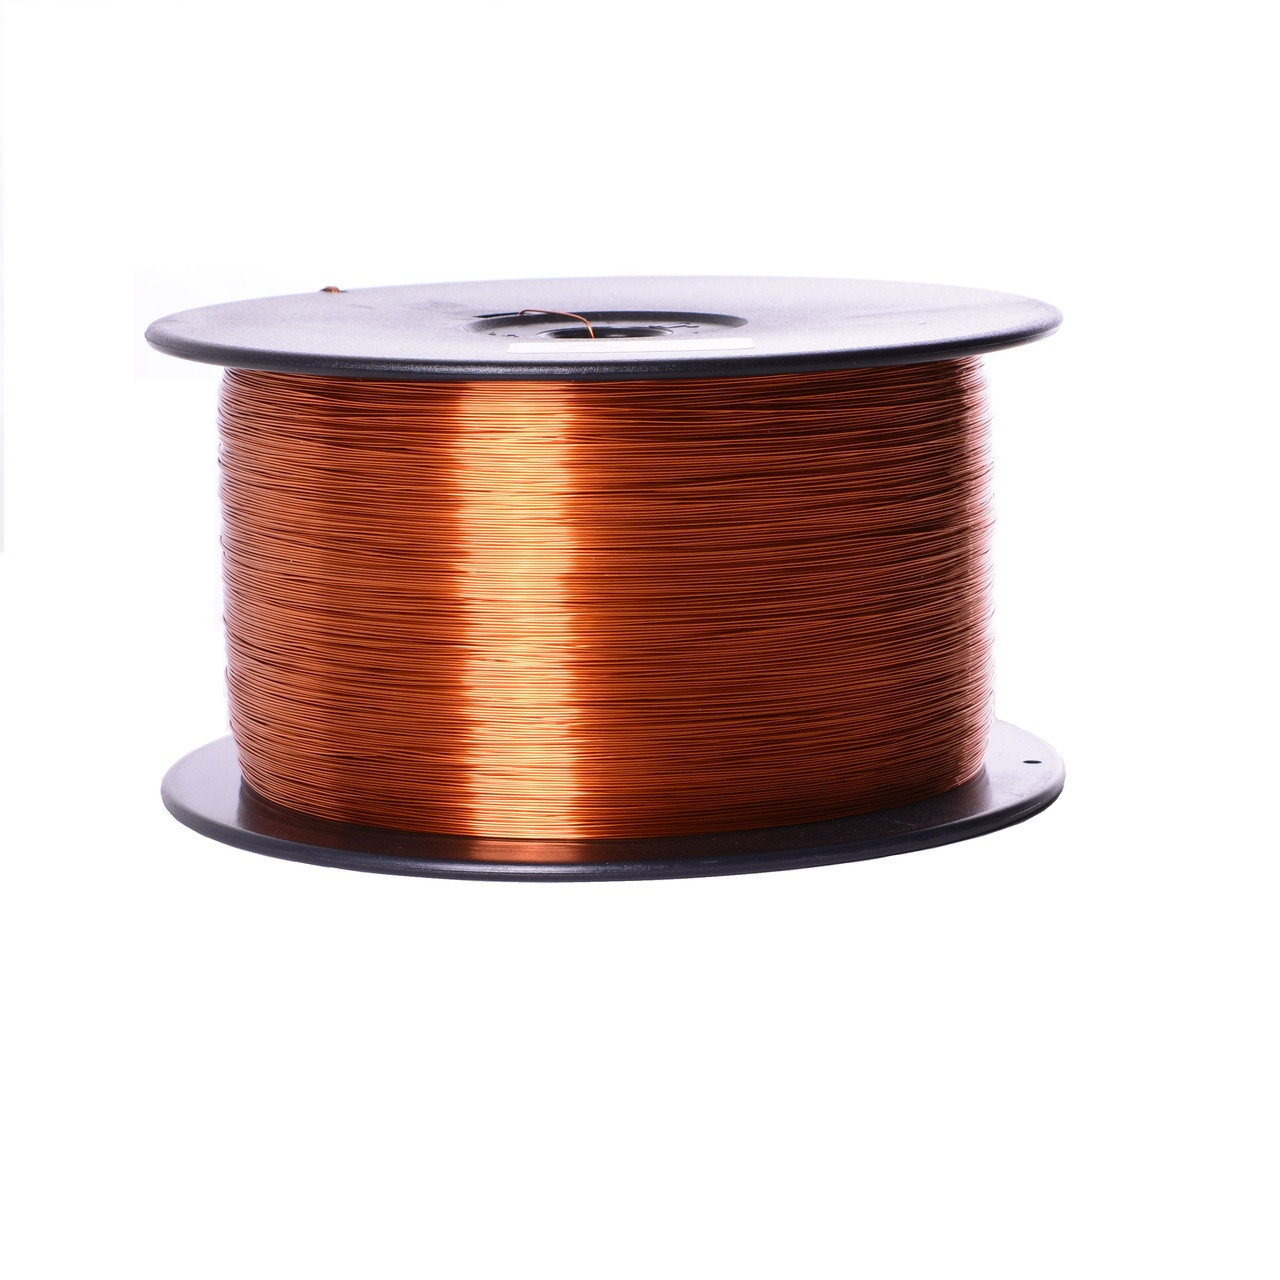 MAGNET WIRE 2.50mm COIL WIRE ENAMELLED COPPER WINDING WIRE 4KG Spool